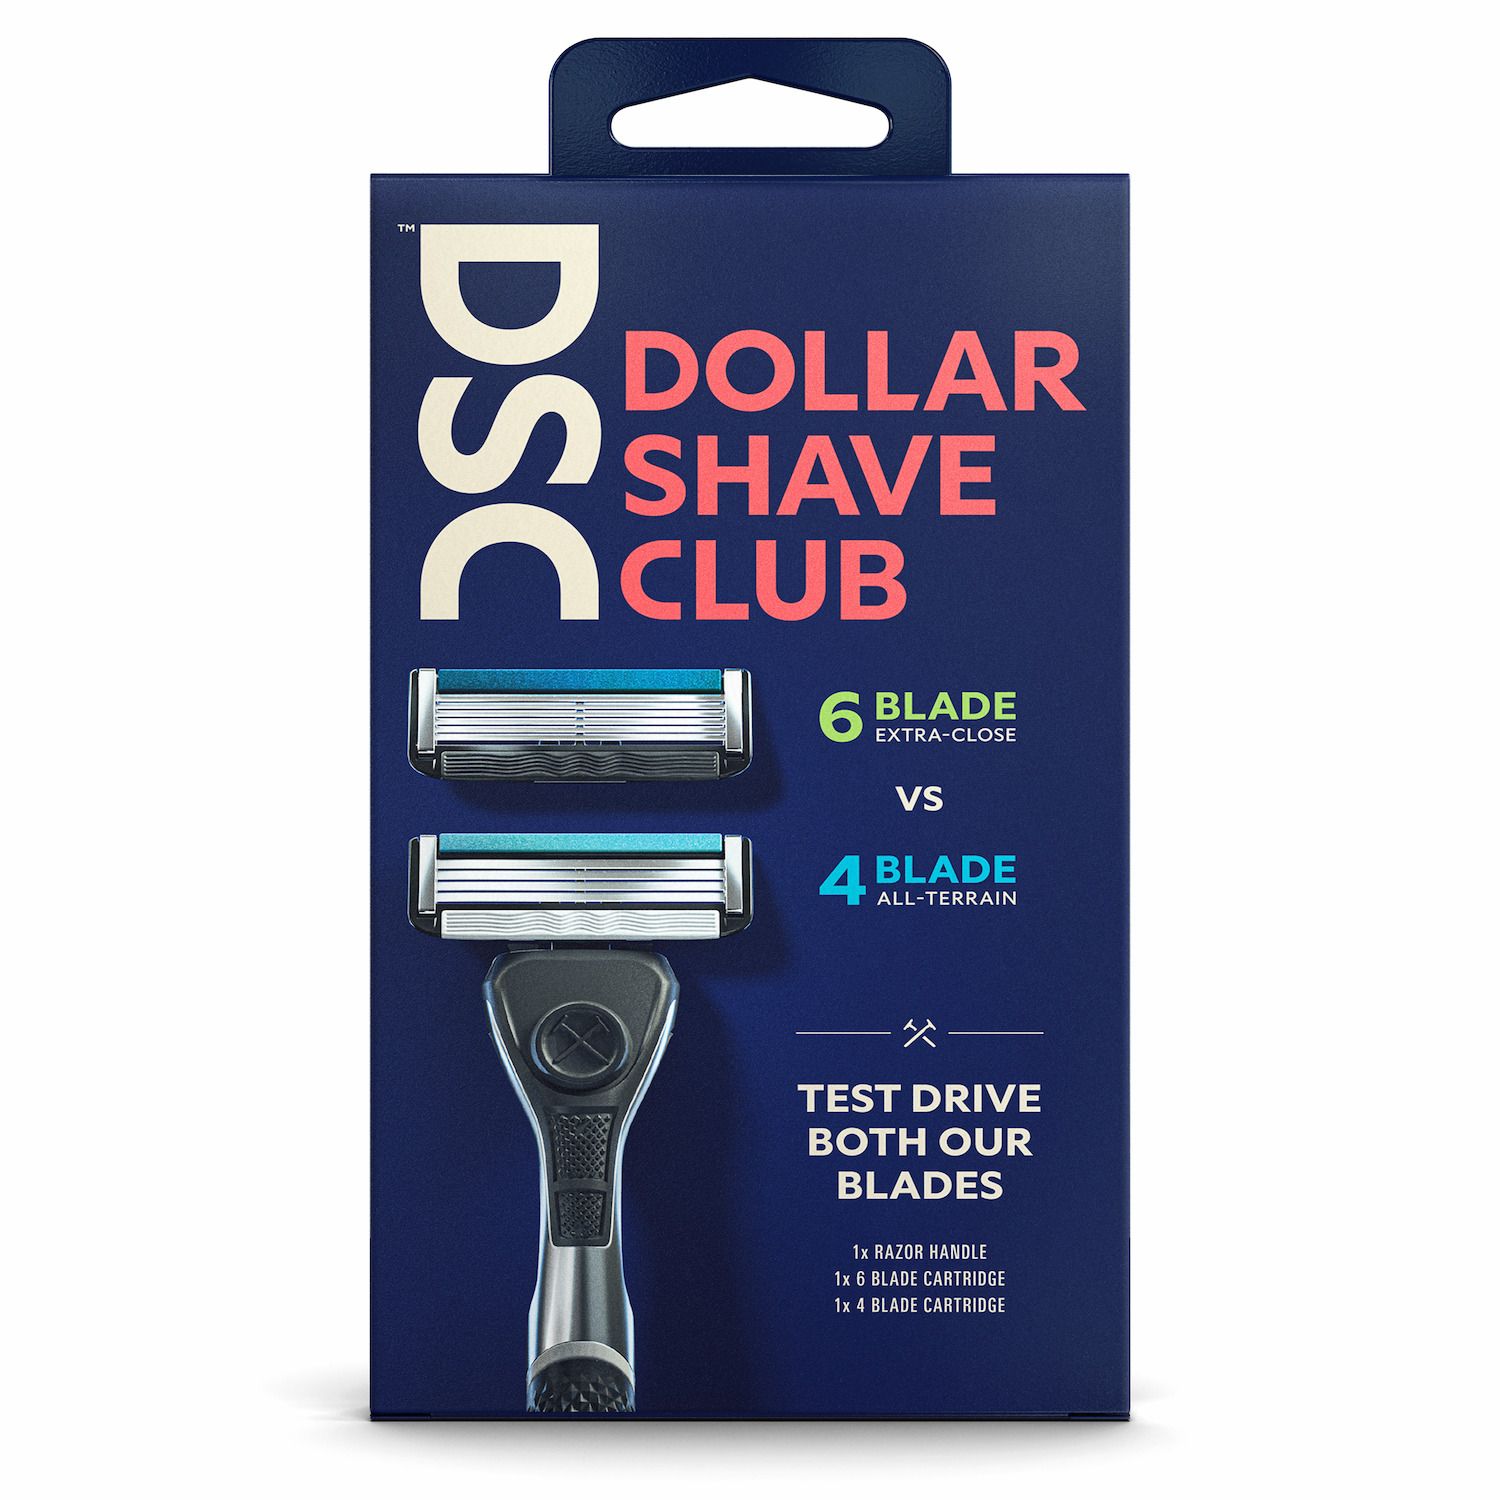 Image for Dollar Shave Club Mixed Razor & Handle Starter Set at Kohl's.